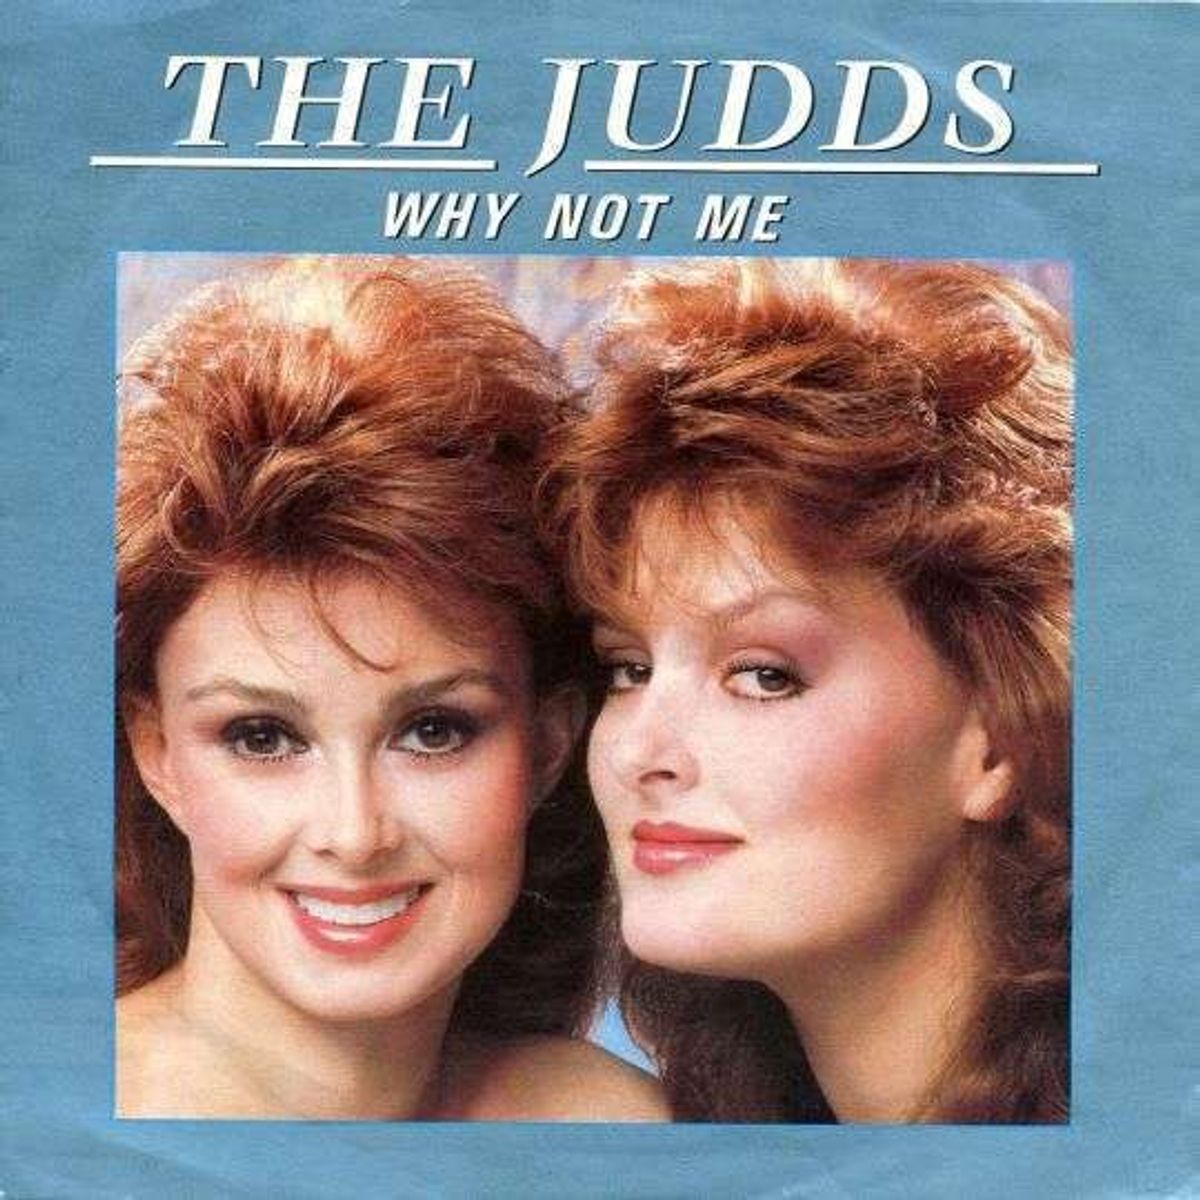 #HarmonieuzeDames - The Judds - Why Not Me (1984)